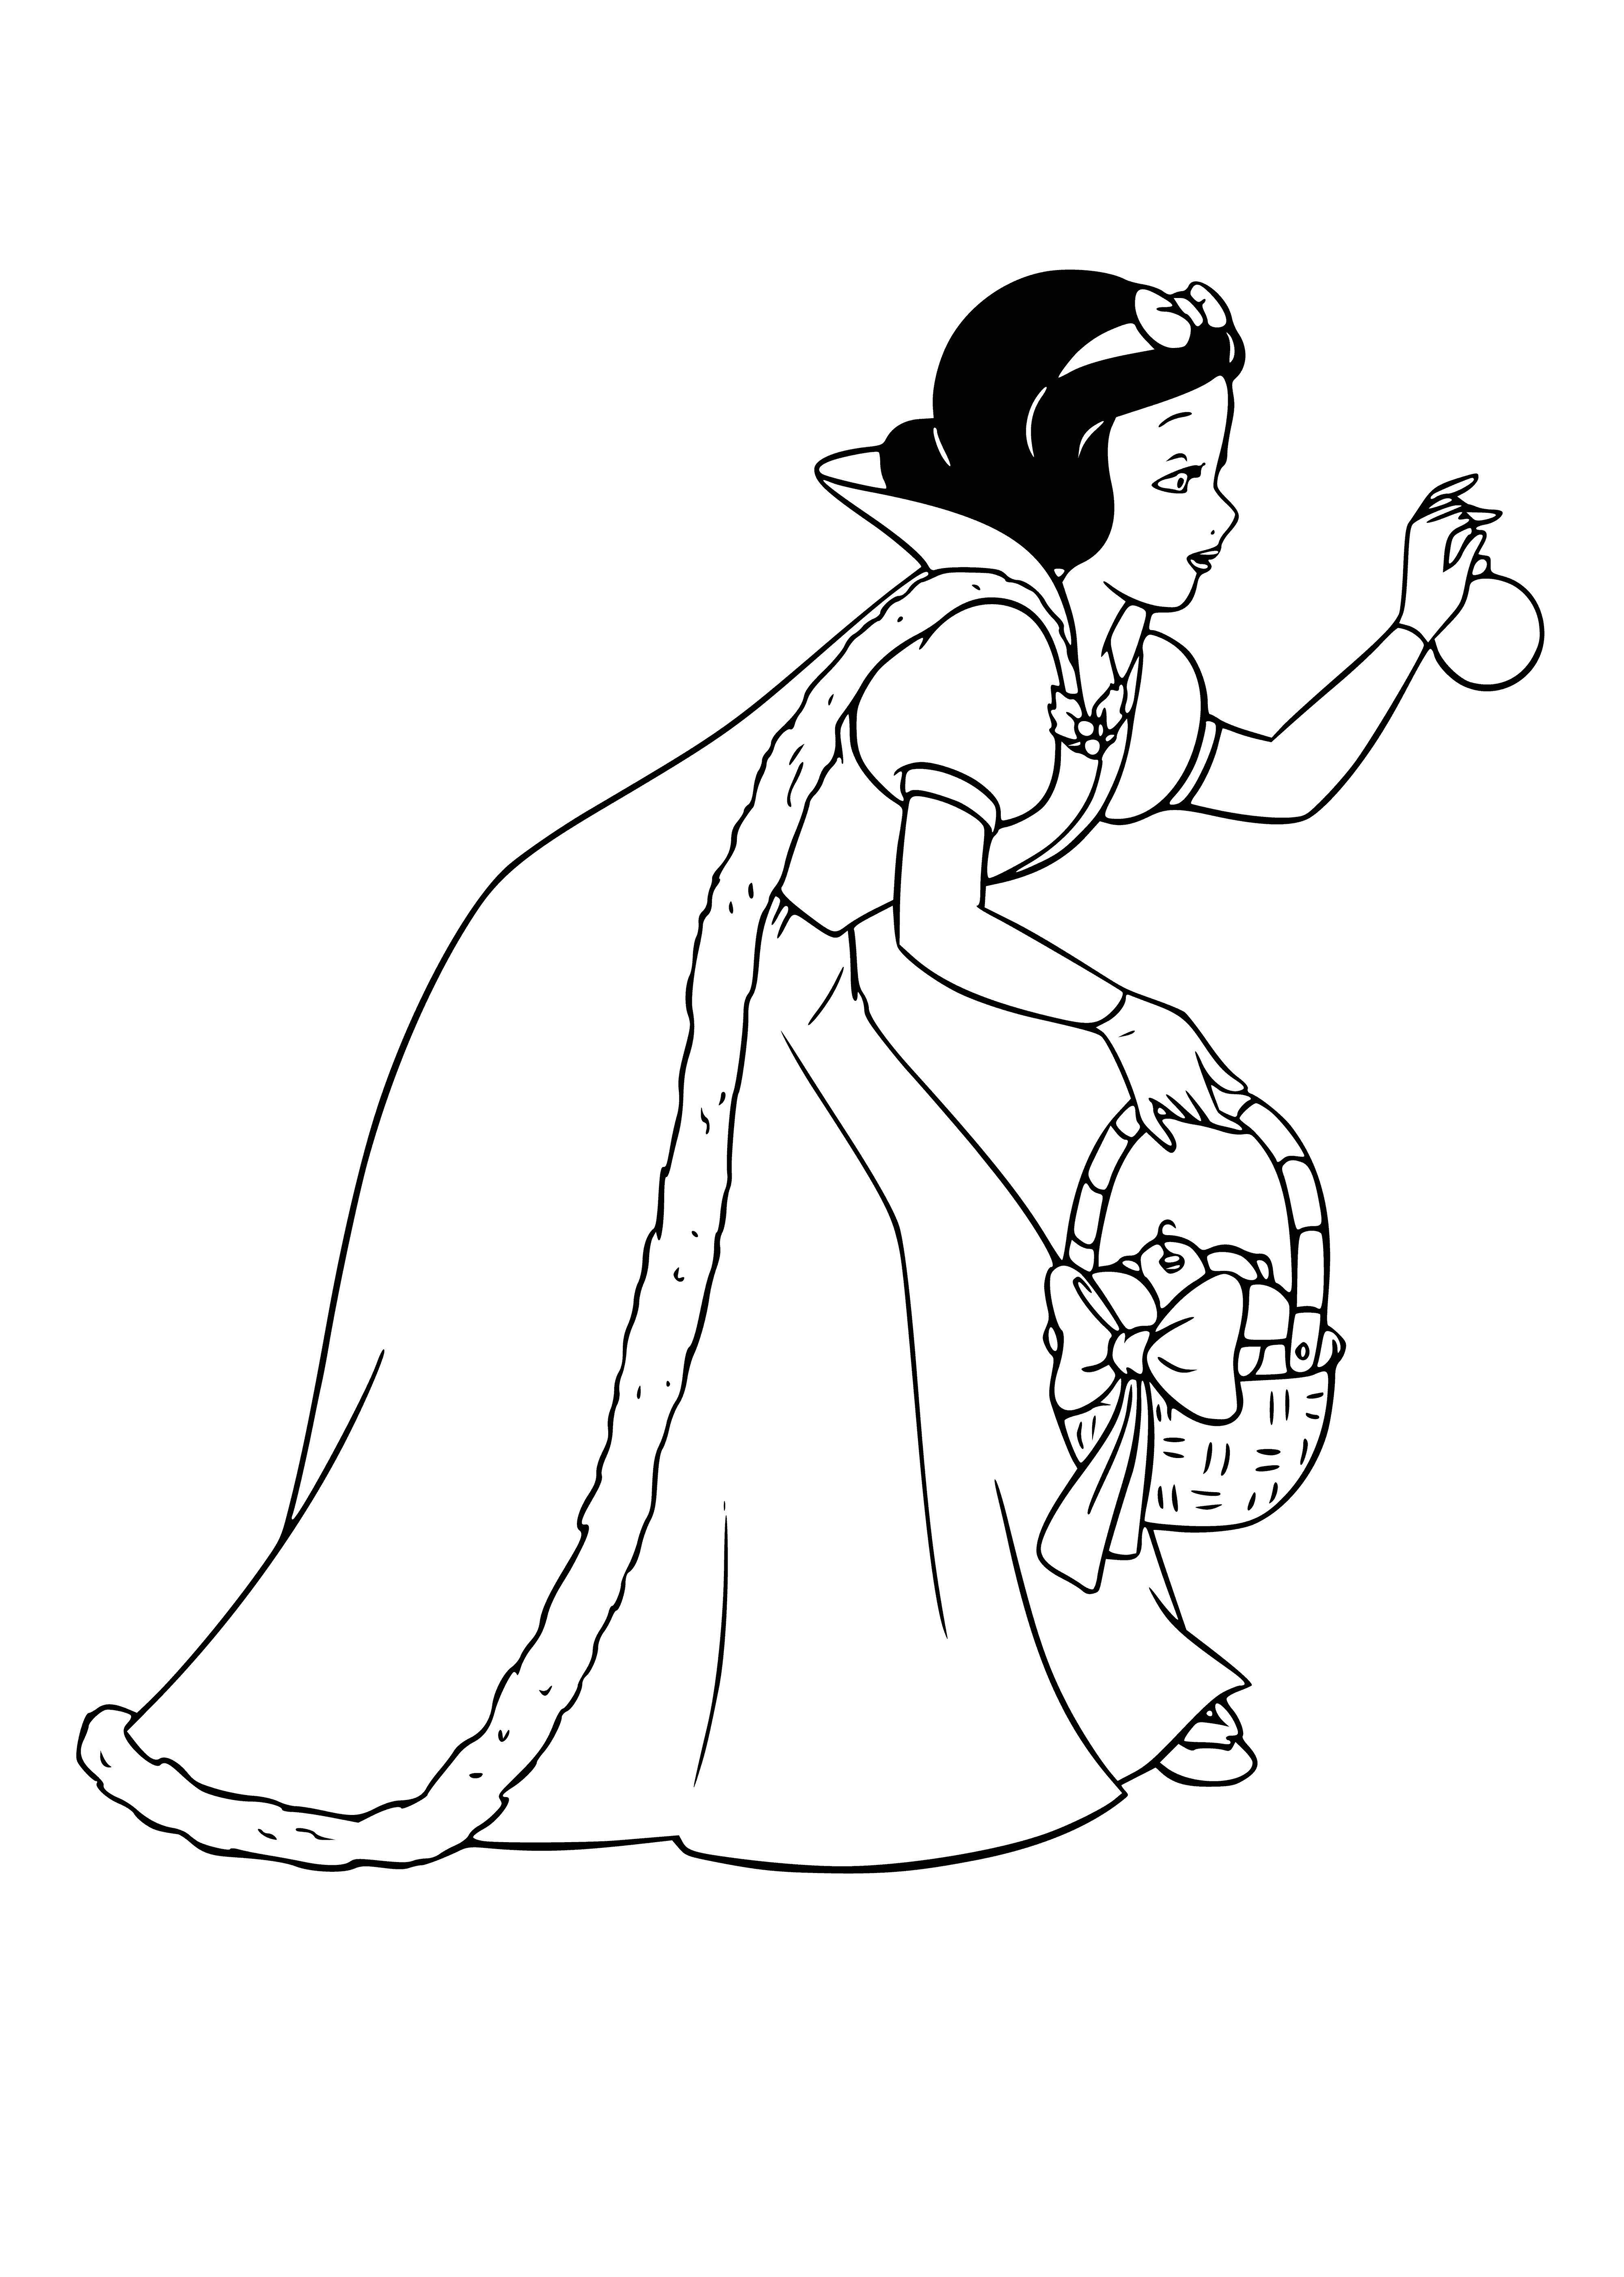 coloring page: Disney princesses ring in the New Year: Snow White hangs Christmas ball amidst presents, tree, & fireplace!